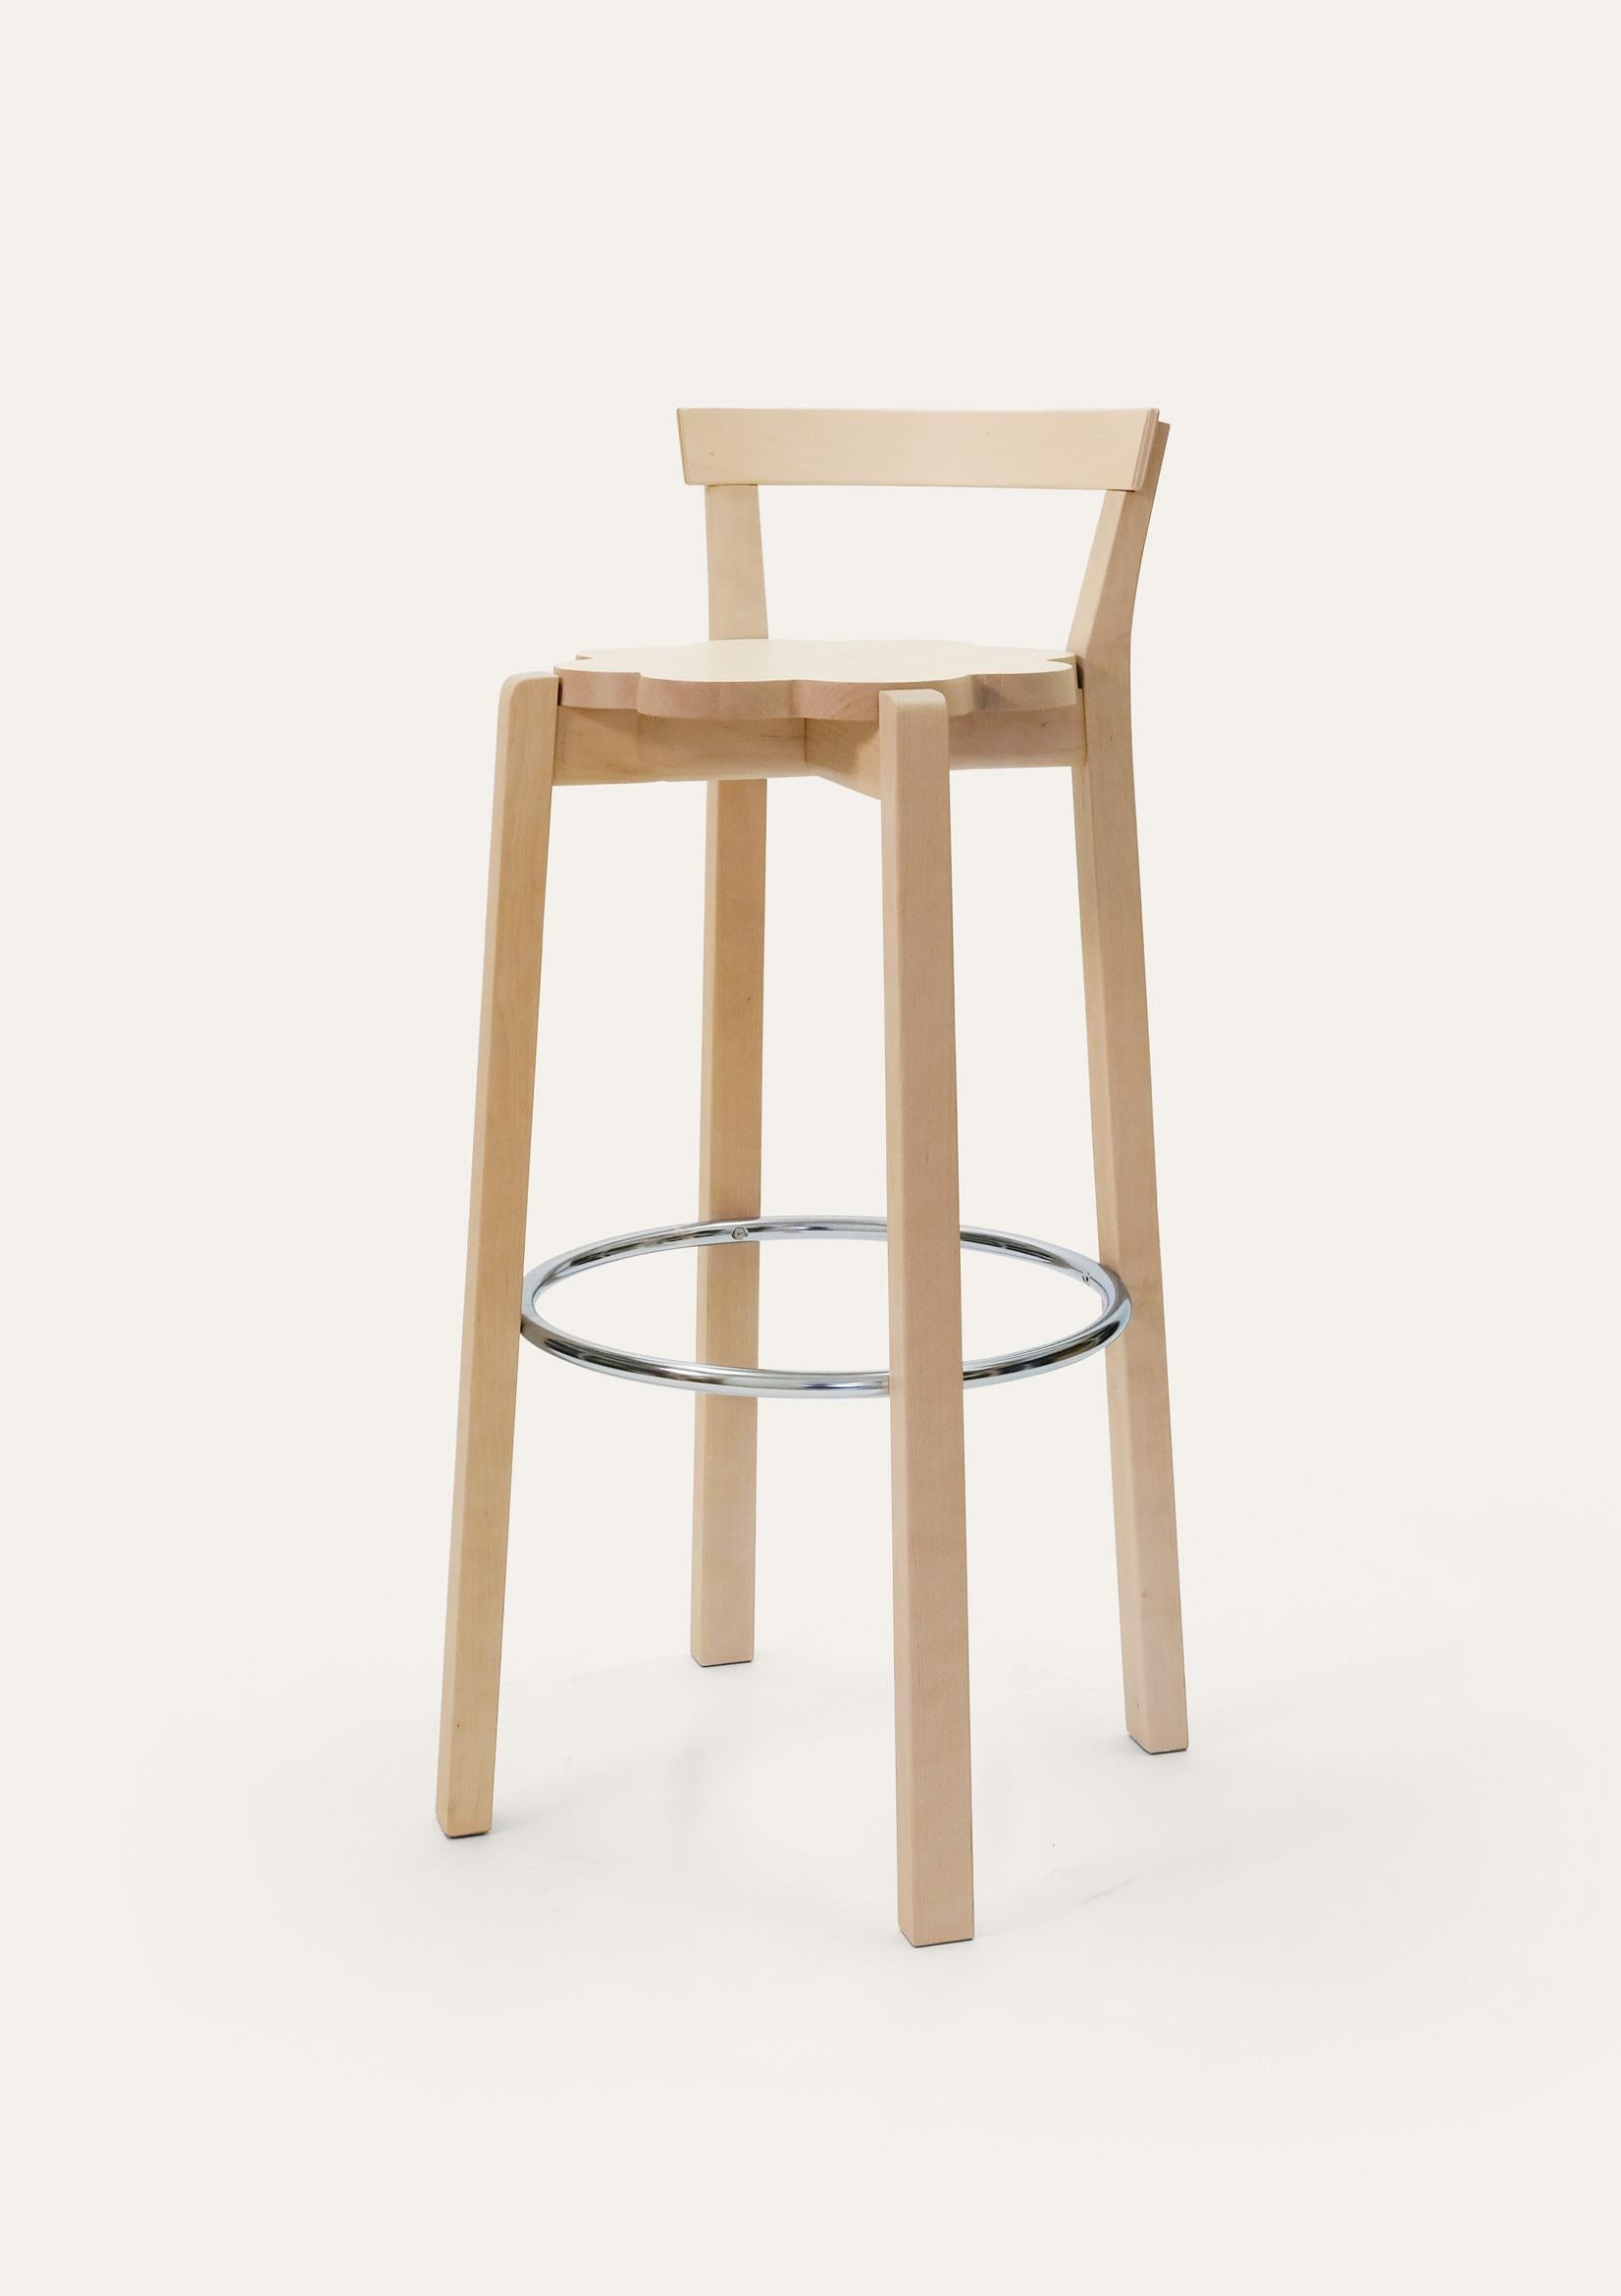 Large Natural Blossom bar chair by Storängen Design
Dimensions: D 45 x W 44 x H 99 x SH 82 cm
Materials: birch wood, steel.
Available in other colors and sizes. With or without backrest.

A small and neat stackable chair, which works well round